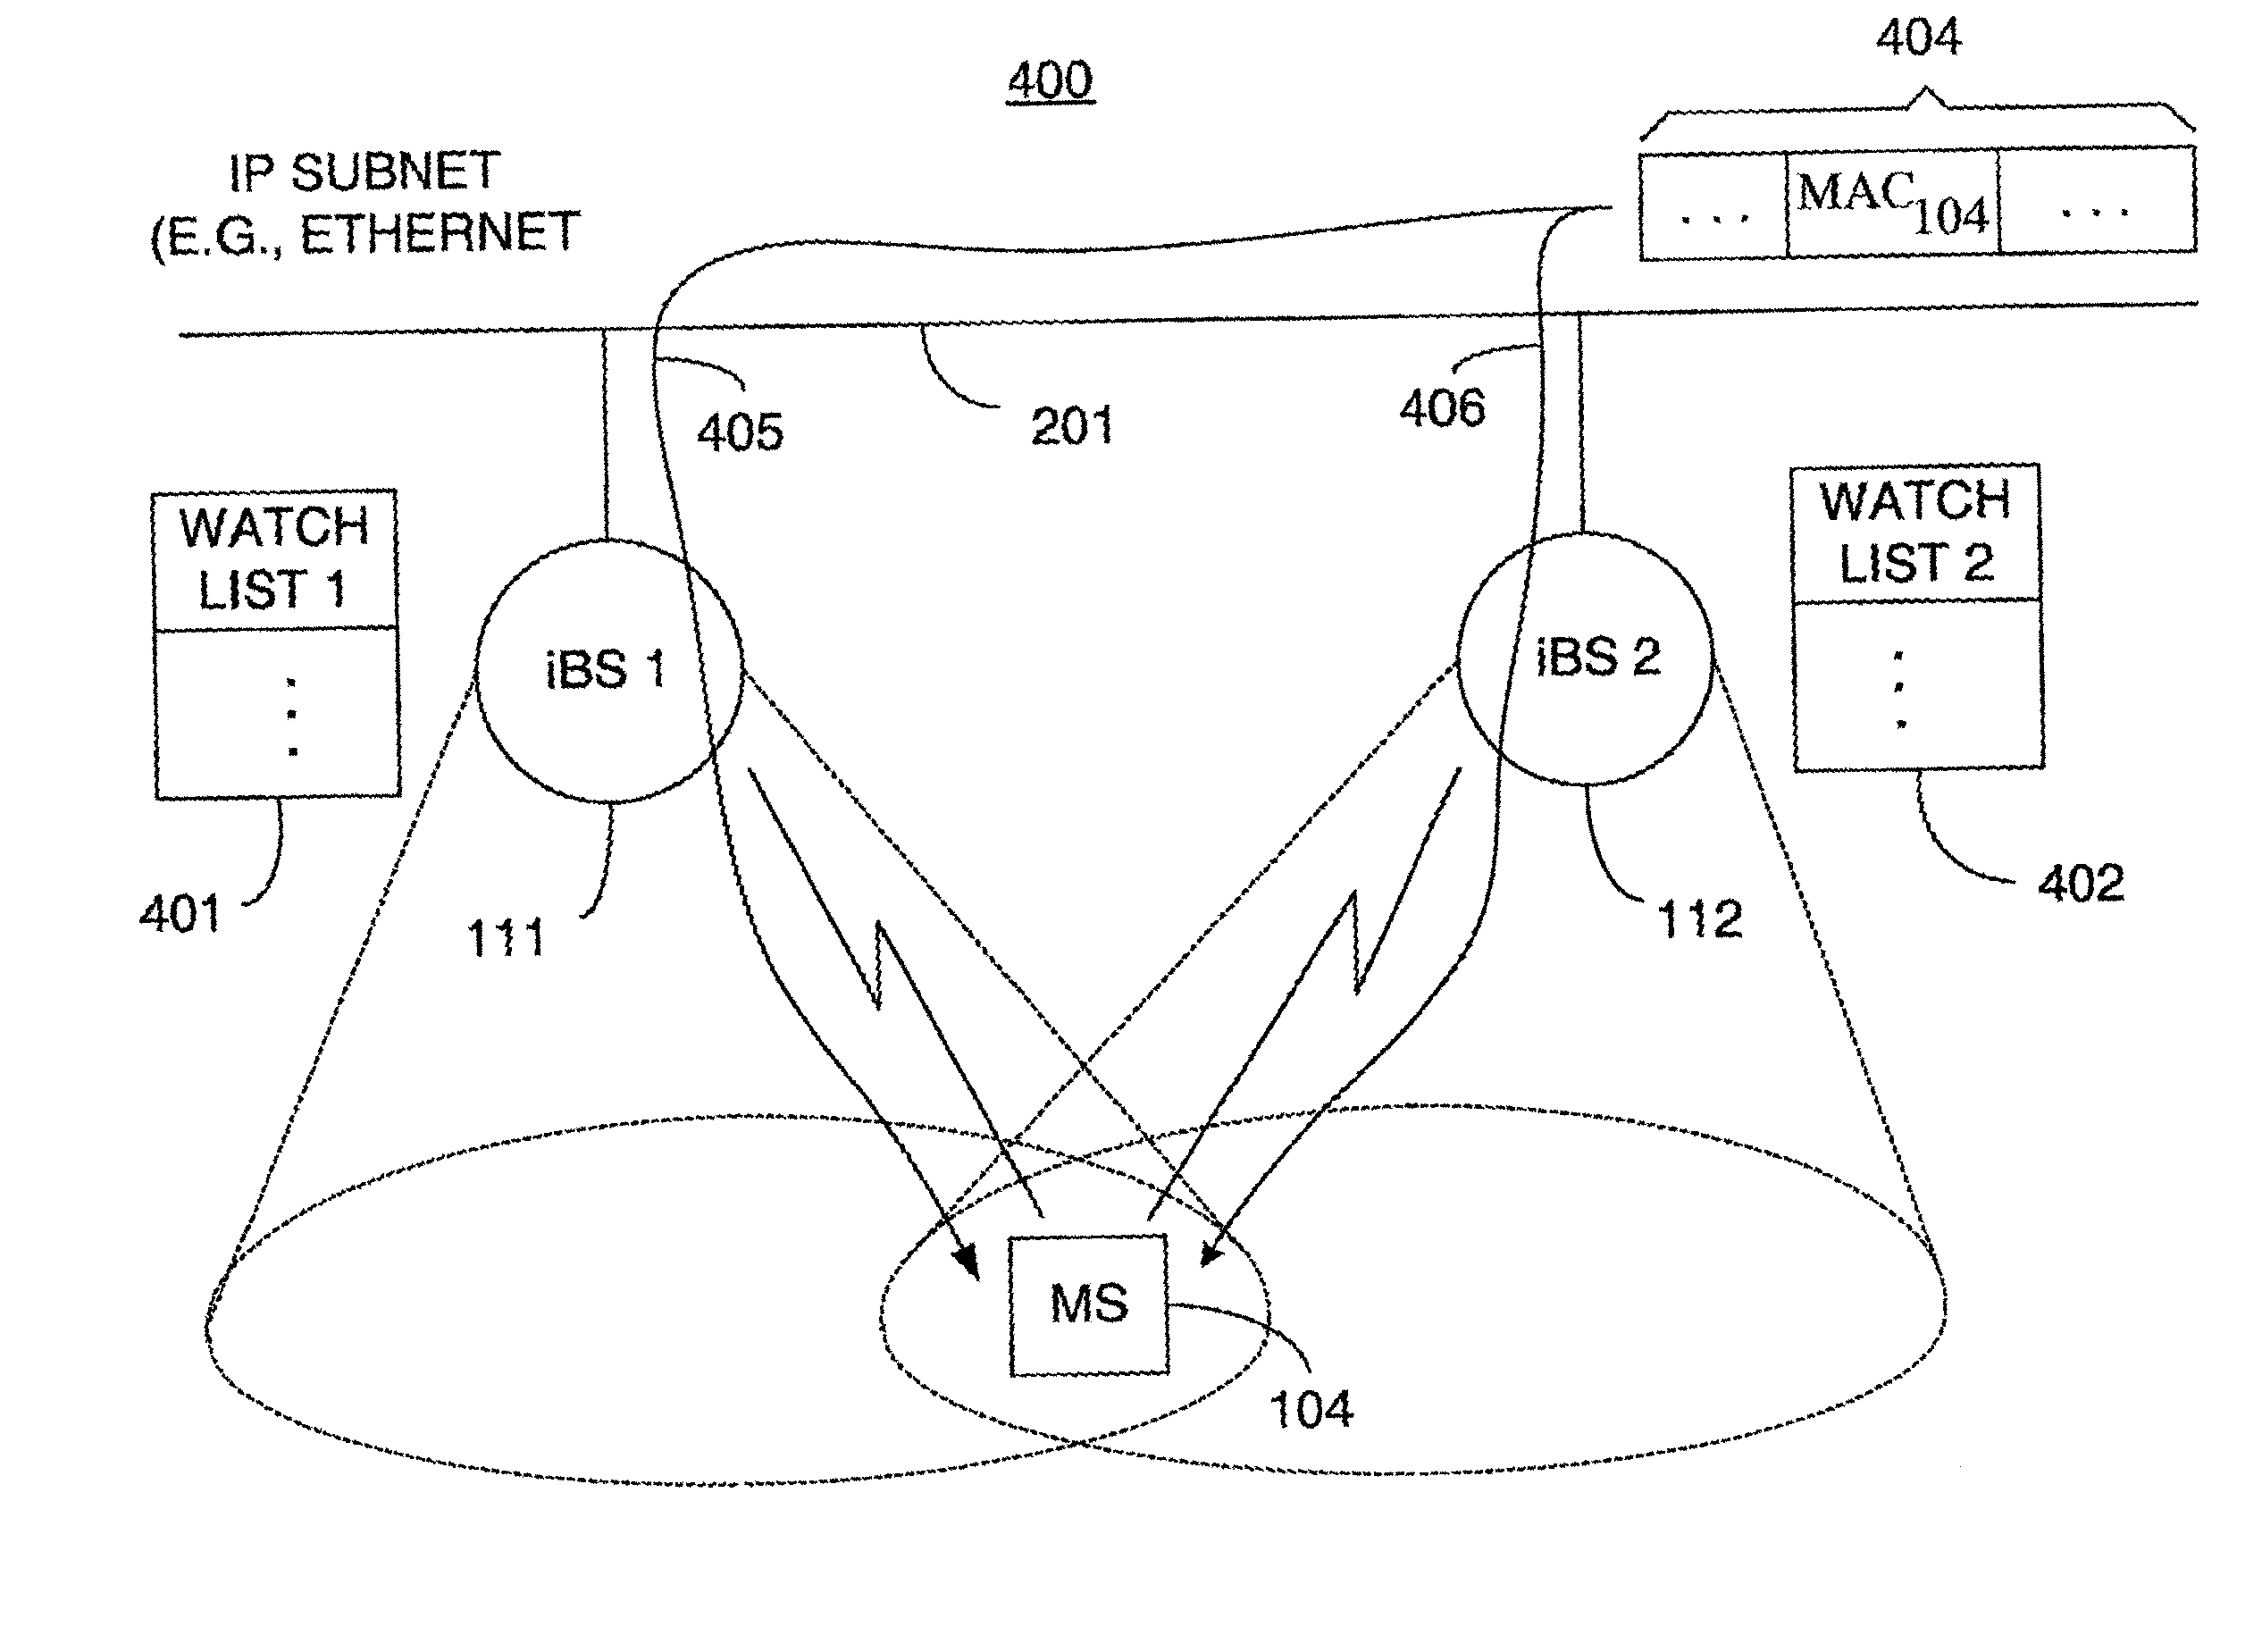 Packet distribution and selection in soft handoff for IP-based base stations among multiple subnets